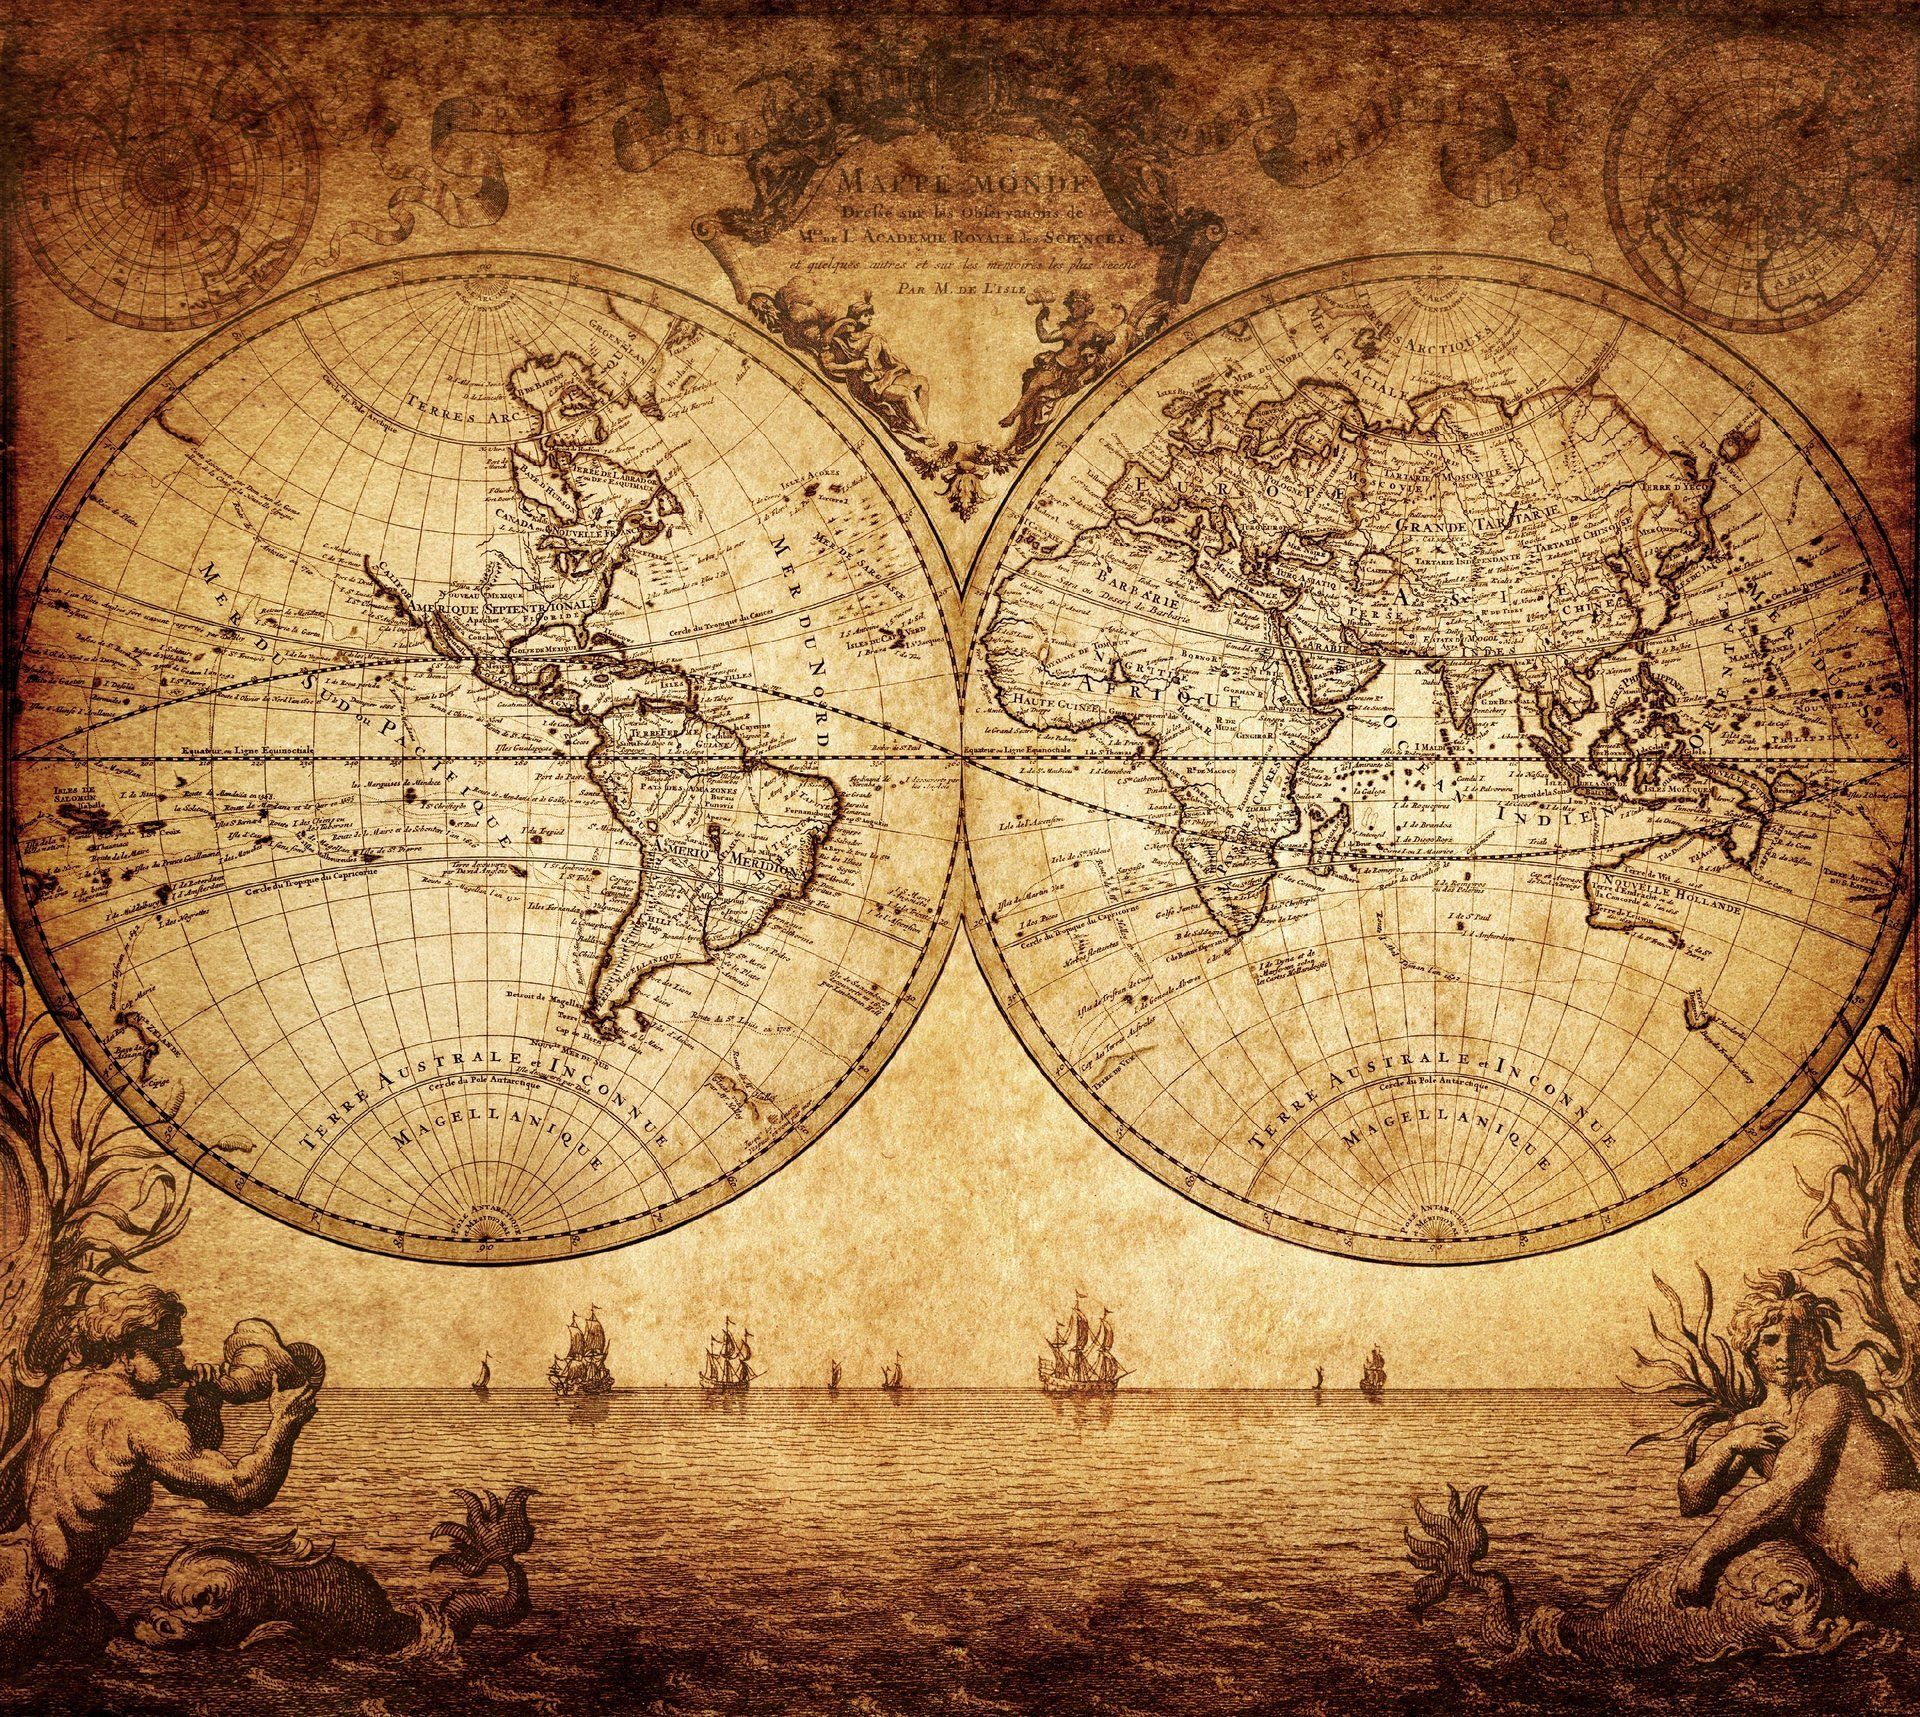 An ancient map of the world